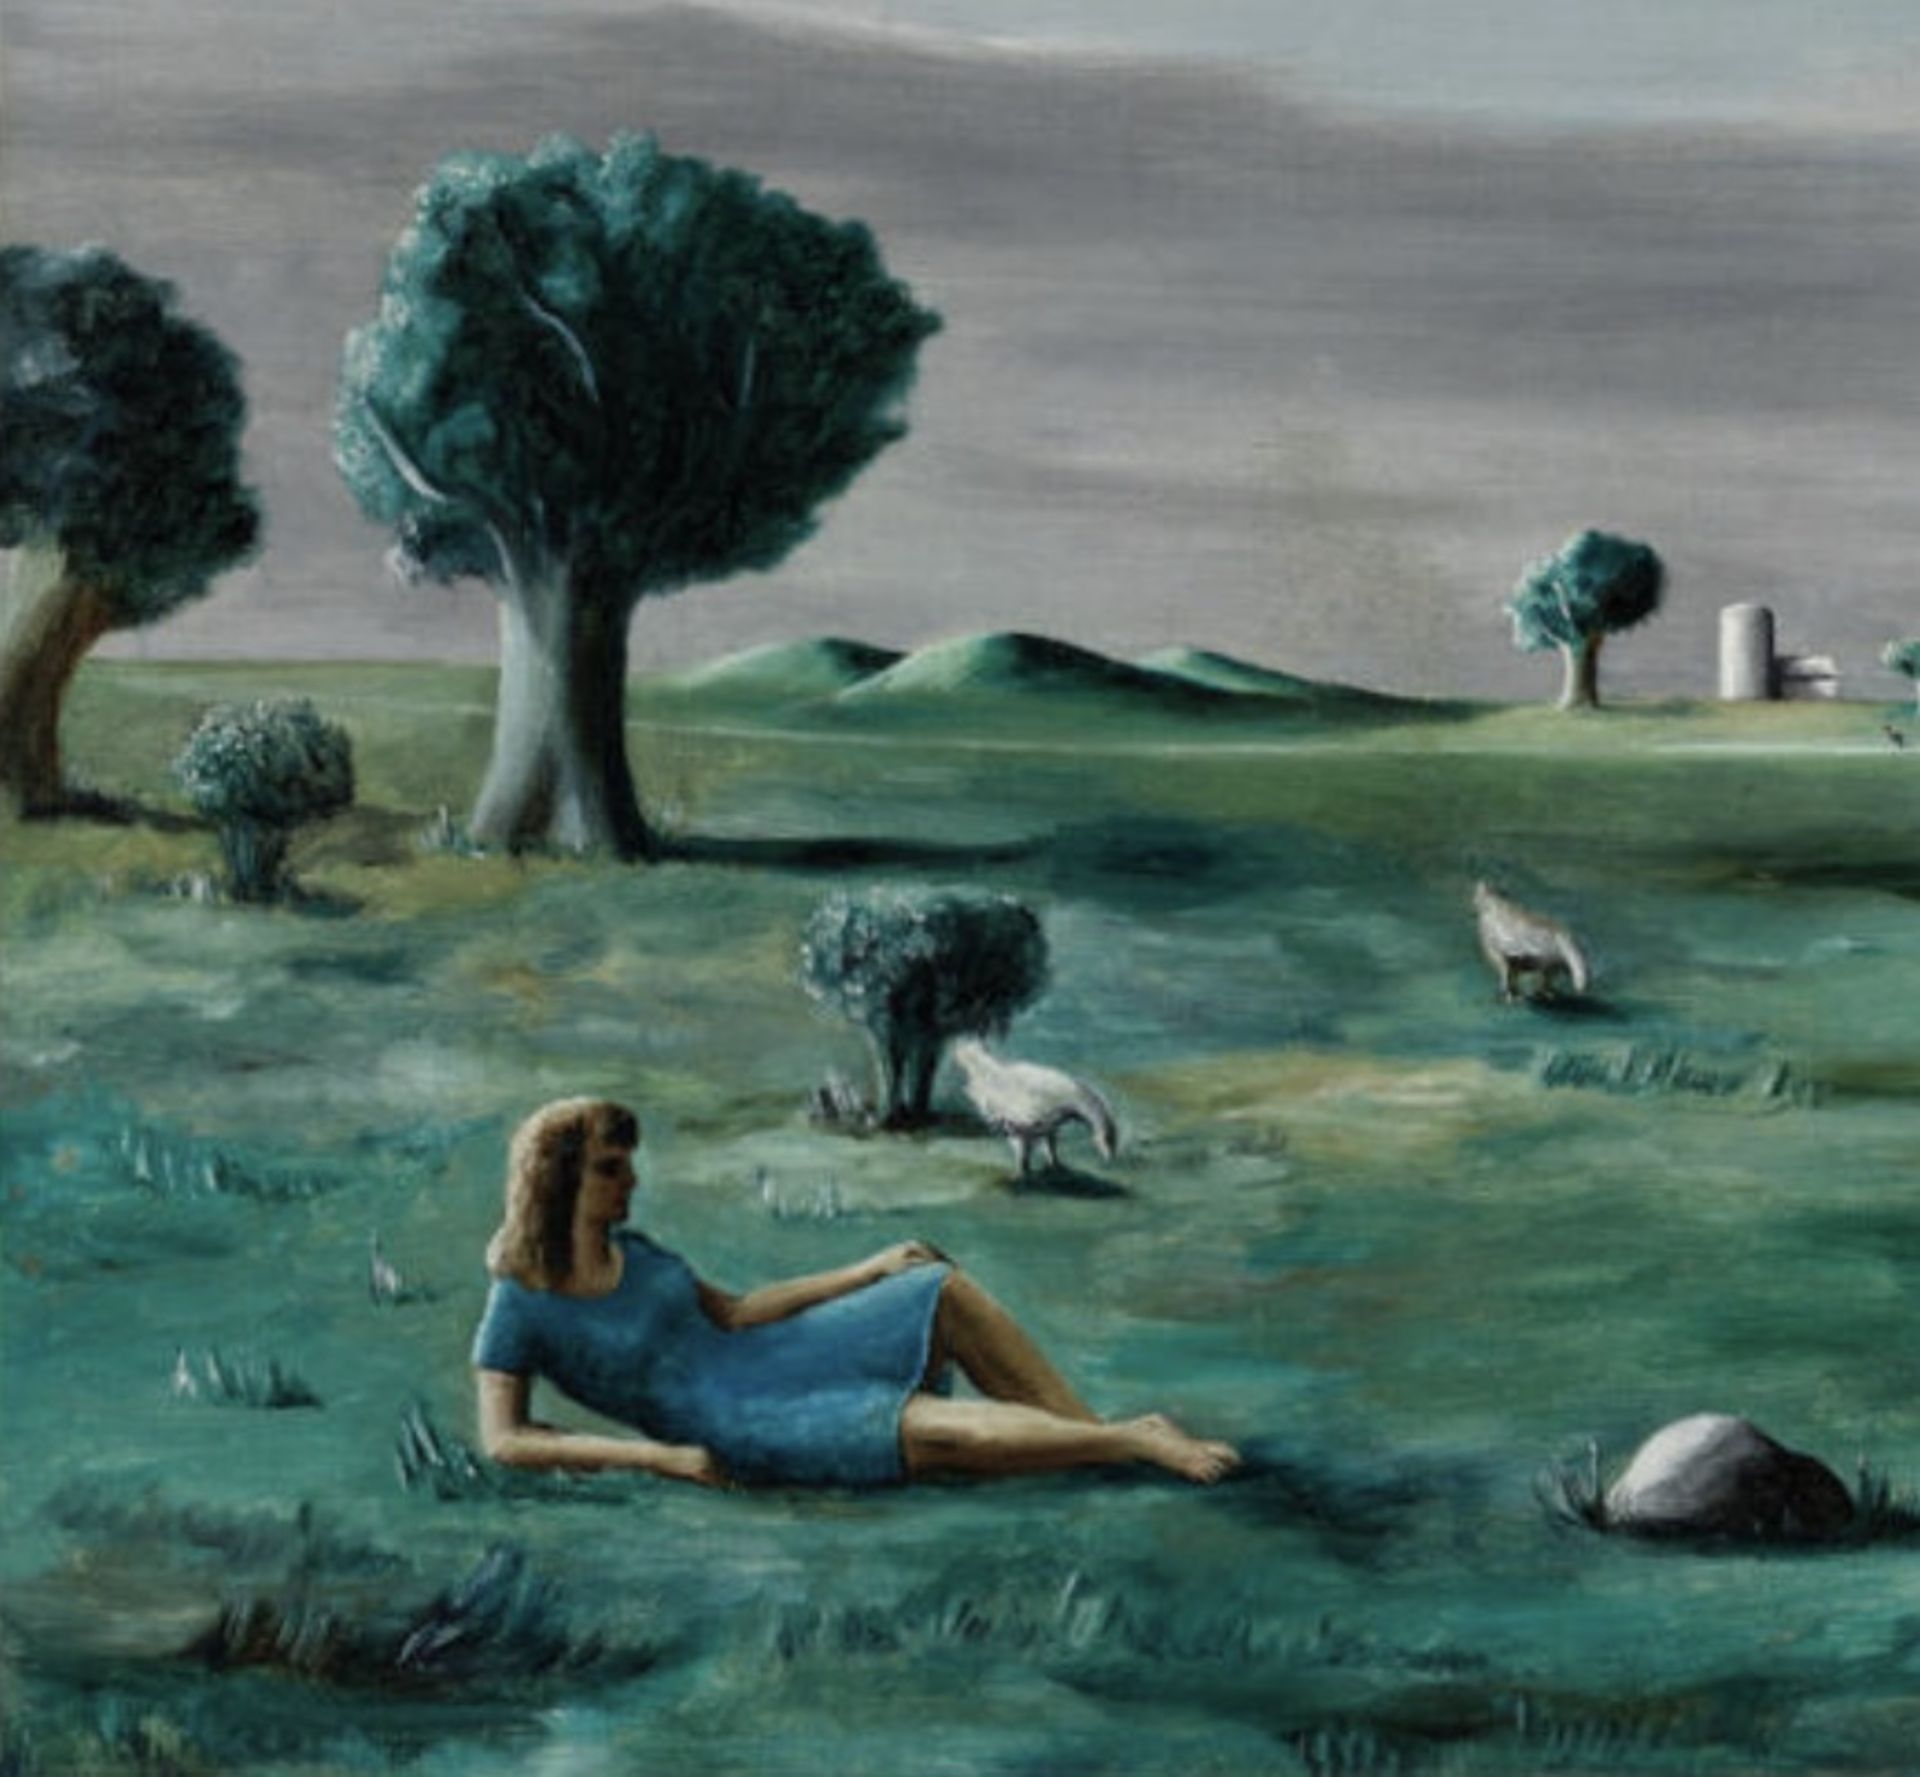 Gertrude Abercrombie "Out in the Country, 1939" Offset Lithograph - Image 4 of 5